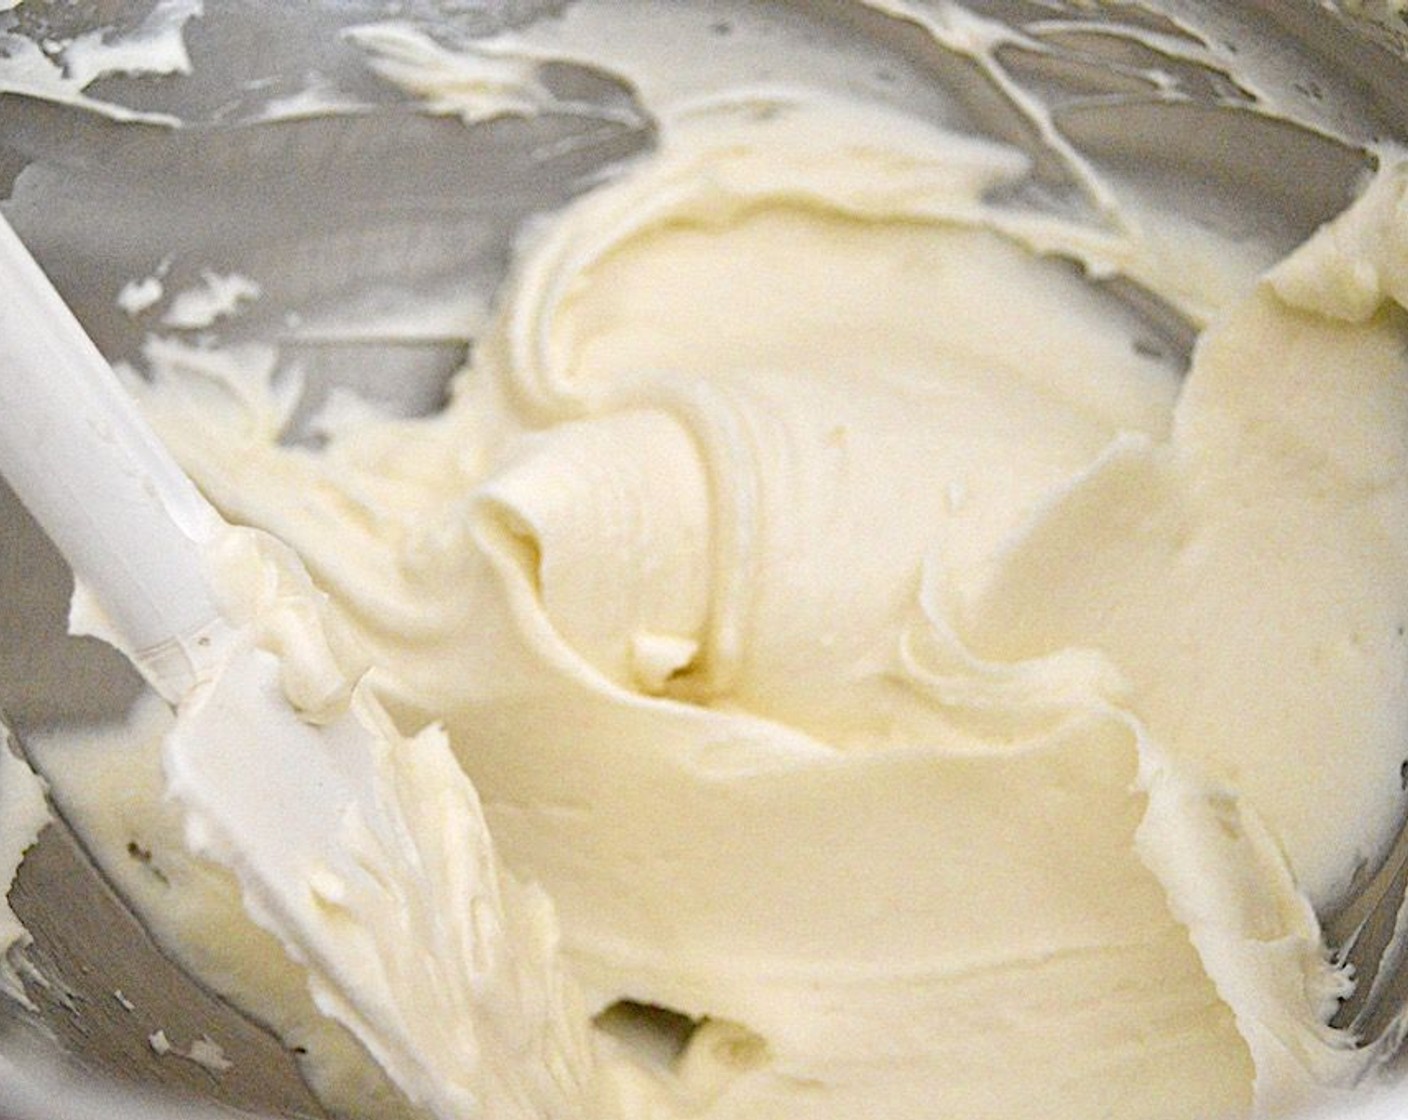 step 7 Combine the Cream Cheese (1 cup) and Unsalted Butter (1/2 cup) in the mixer bowl. Beat them together thoroughly, then turn the speed to low and slowly add the Powdered Confectioners Sugar (3 3/4 cups) and Vanilla Extract (1 tsp) until you have a rich, smooth frosting.